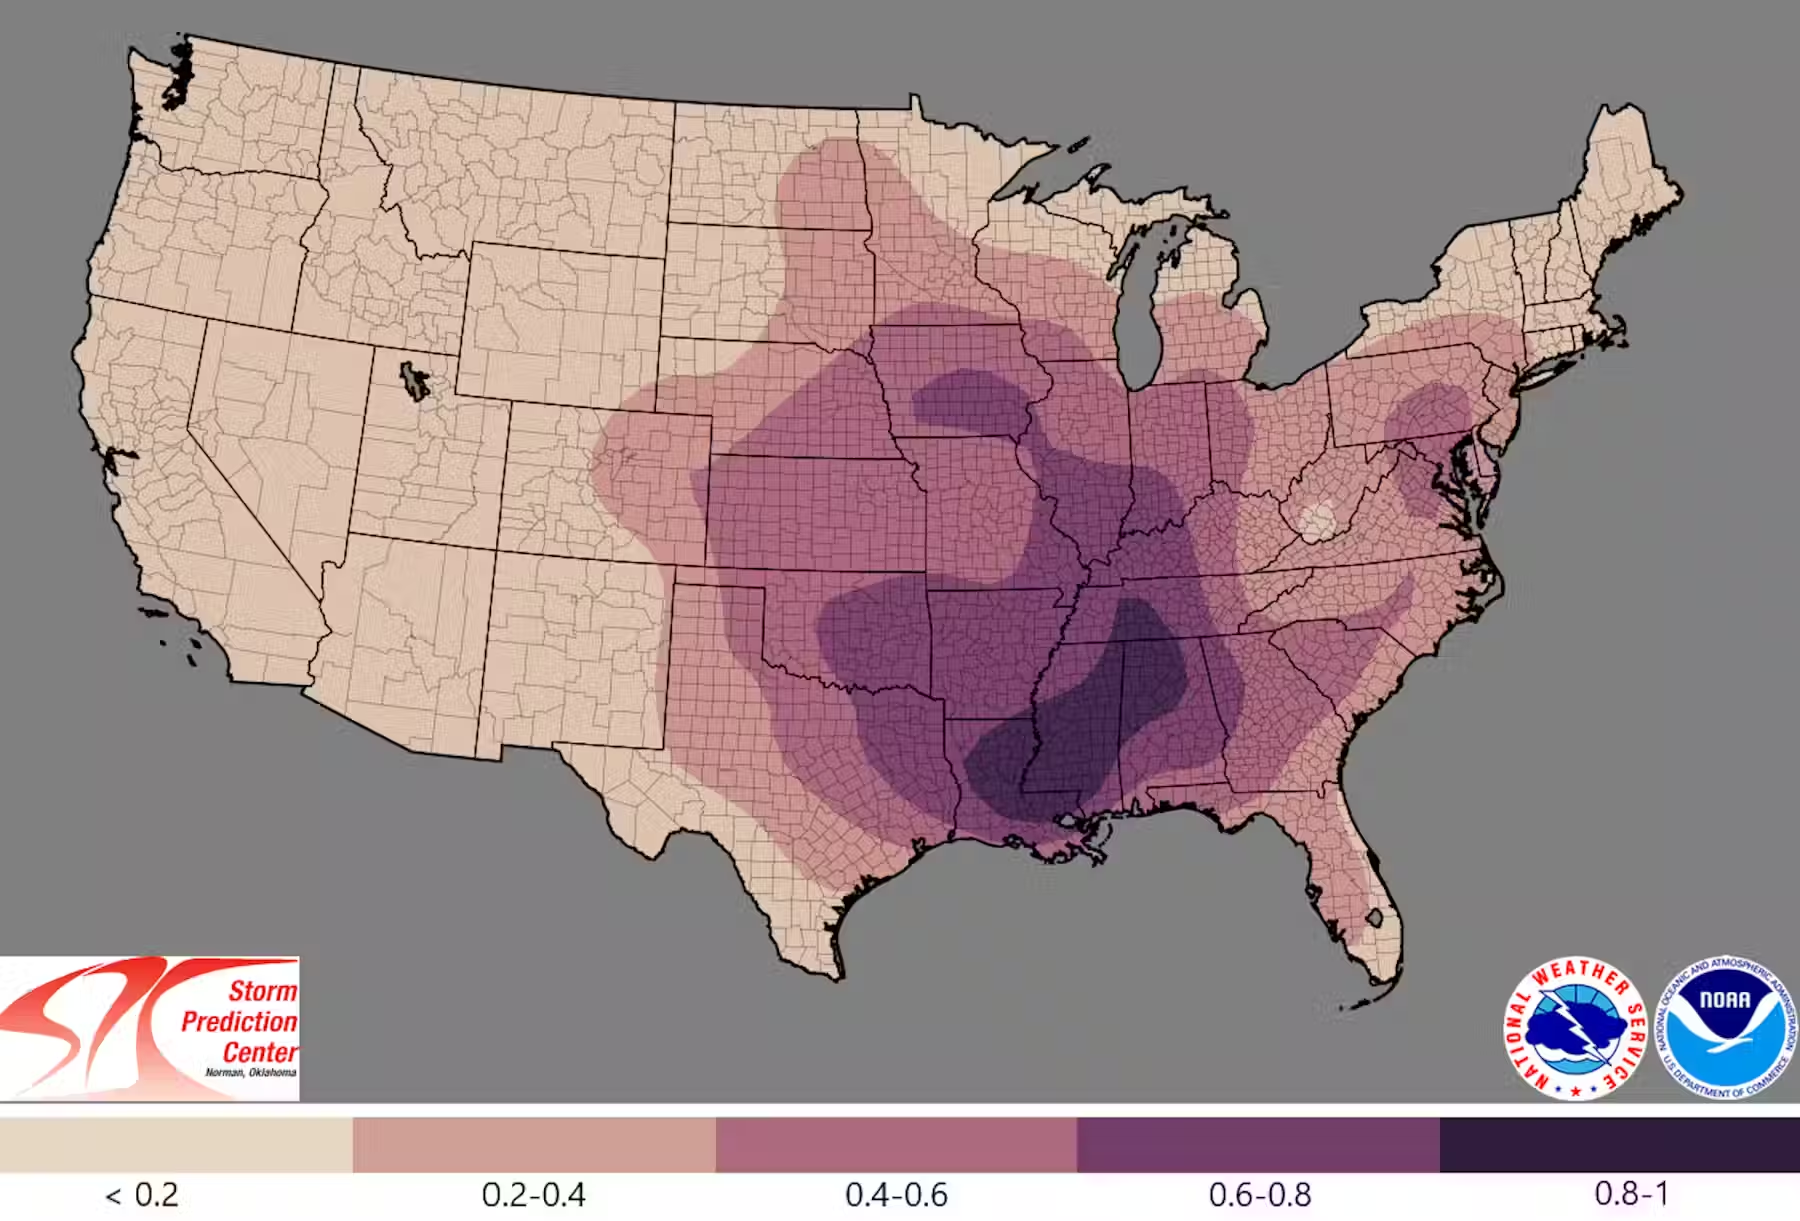 Map showing average number of days per year with a tornado registering EF1 strength or greater within 25 miles of each point. The map shows Tornado Alley’s shift eastward. The period covered in 1986 to 2015. Graphic: NOAA Storm Prediction Center